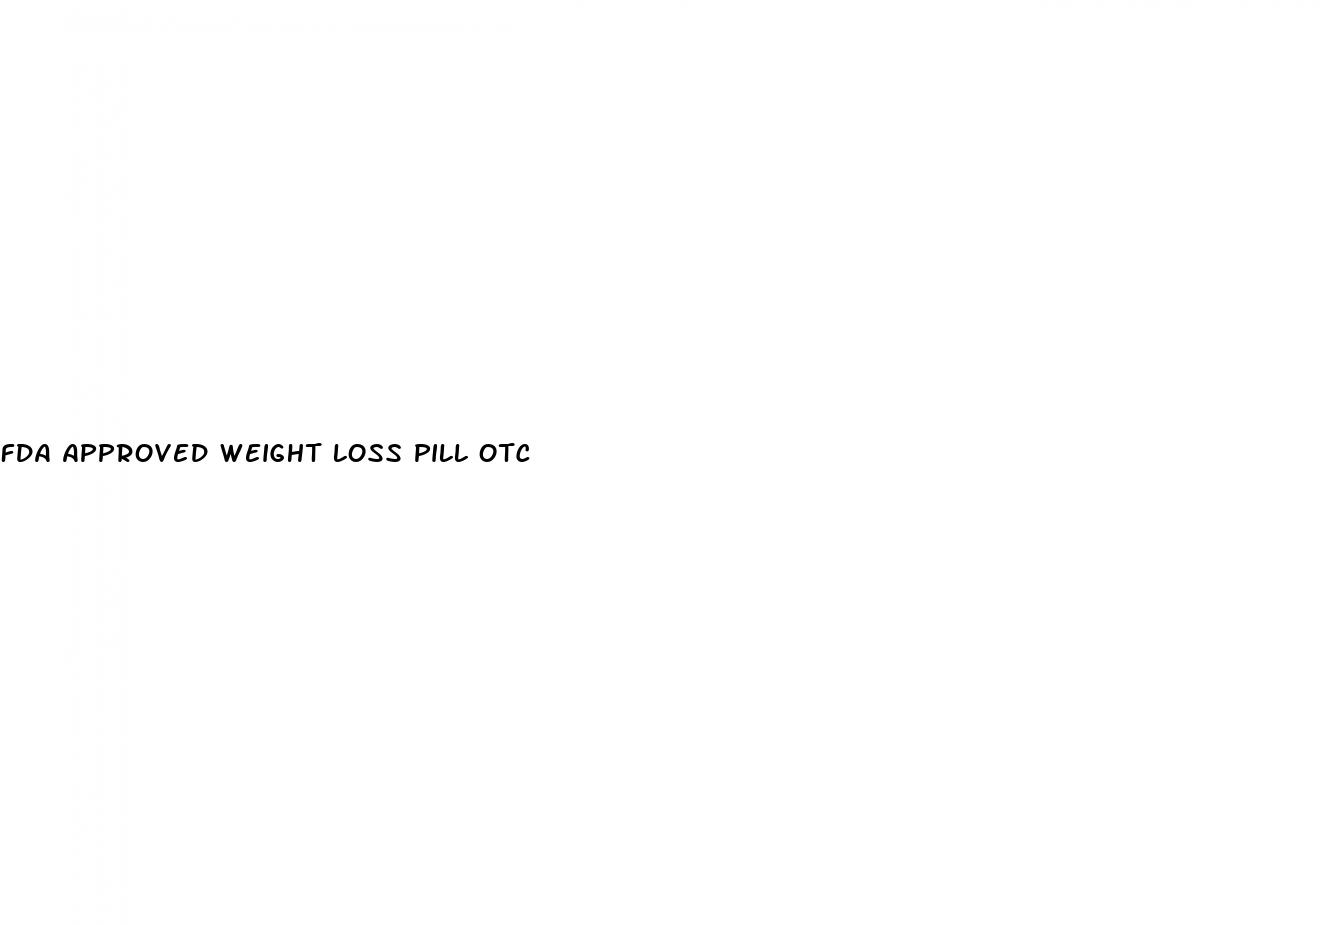 fda approved weight loss pill otc